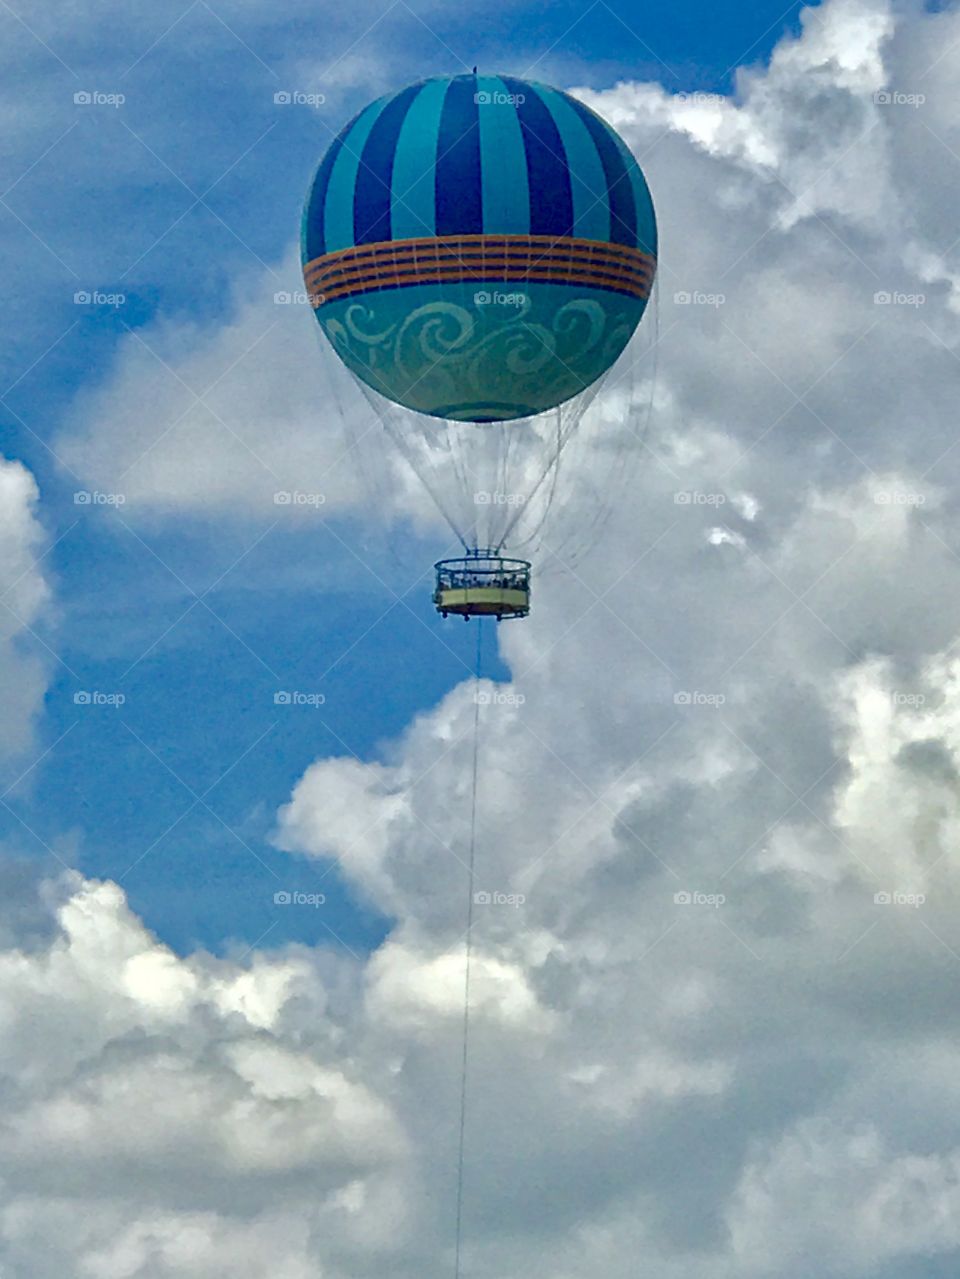 Flying Tethered Balloon Ride